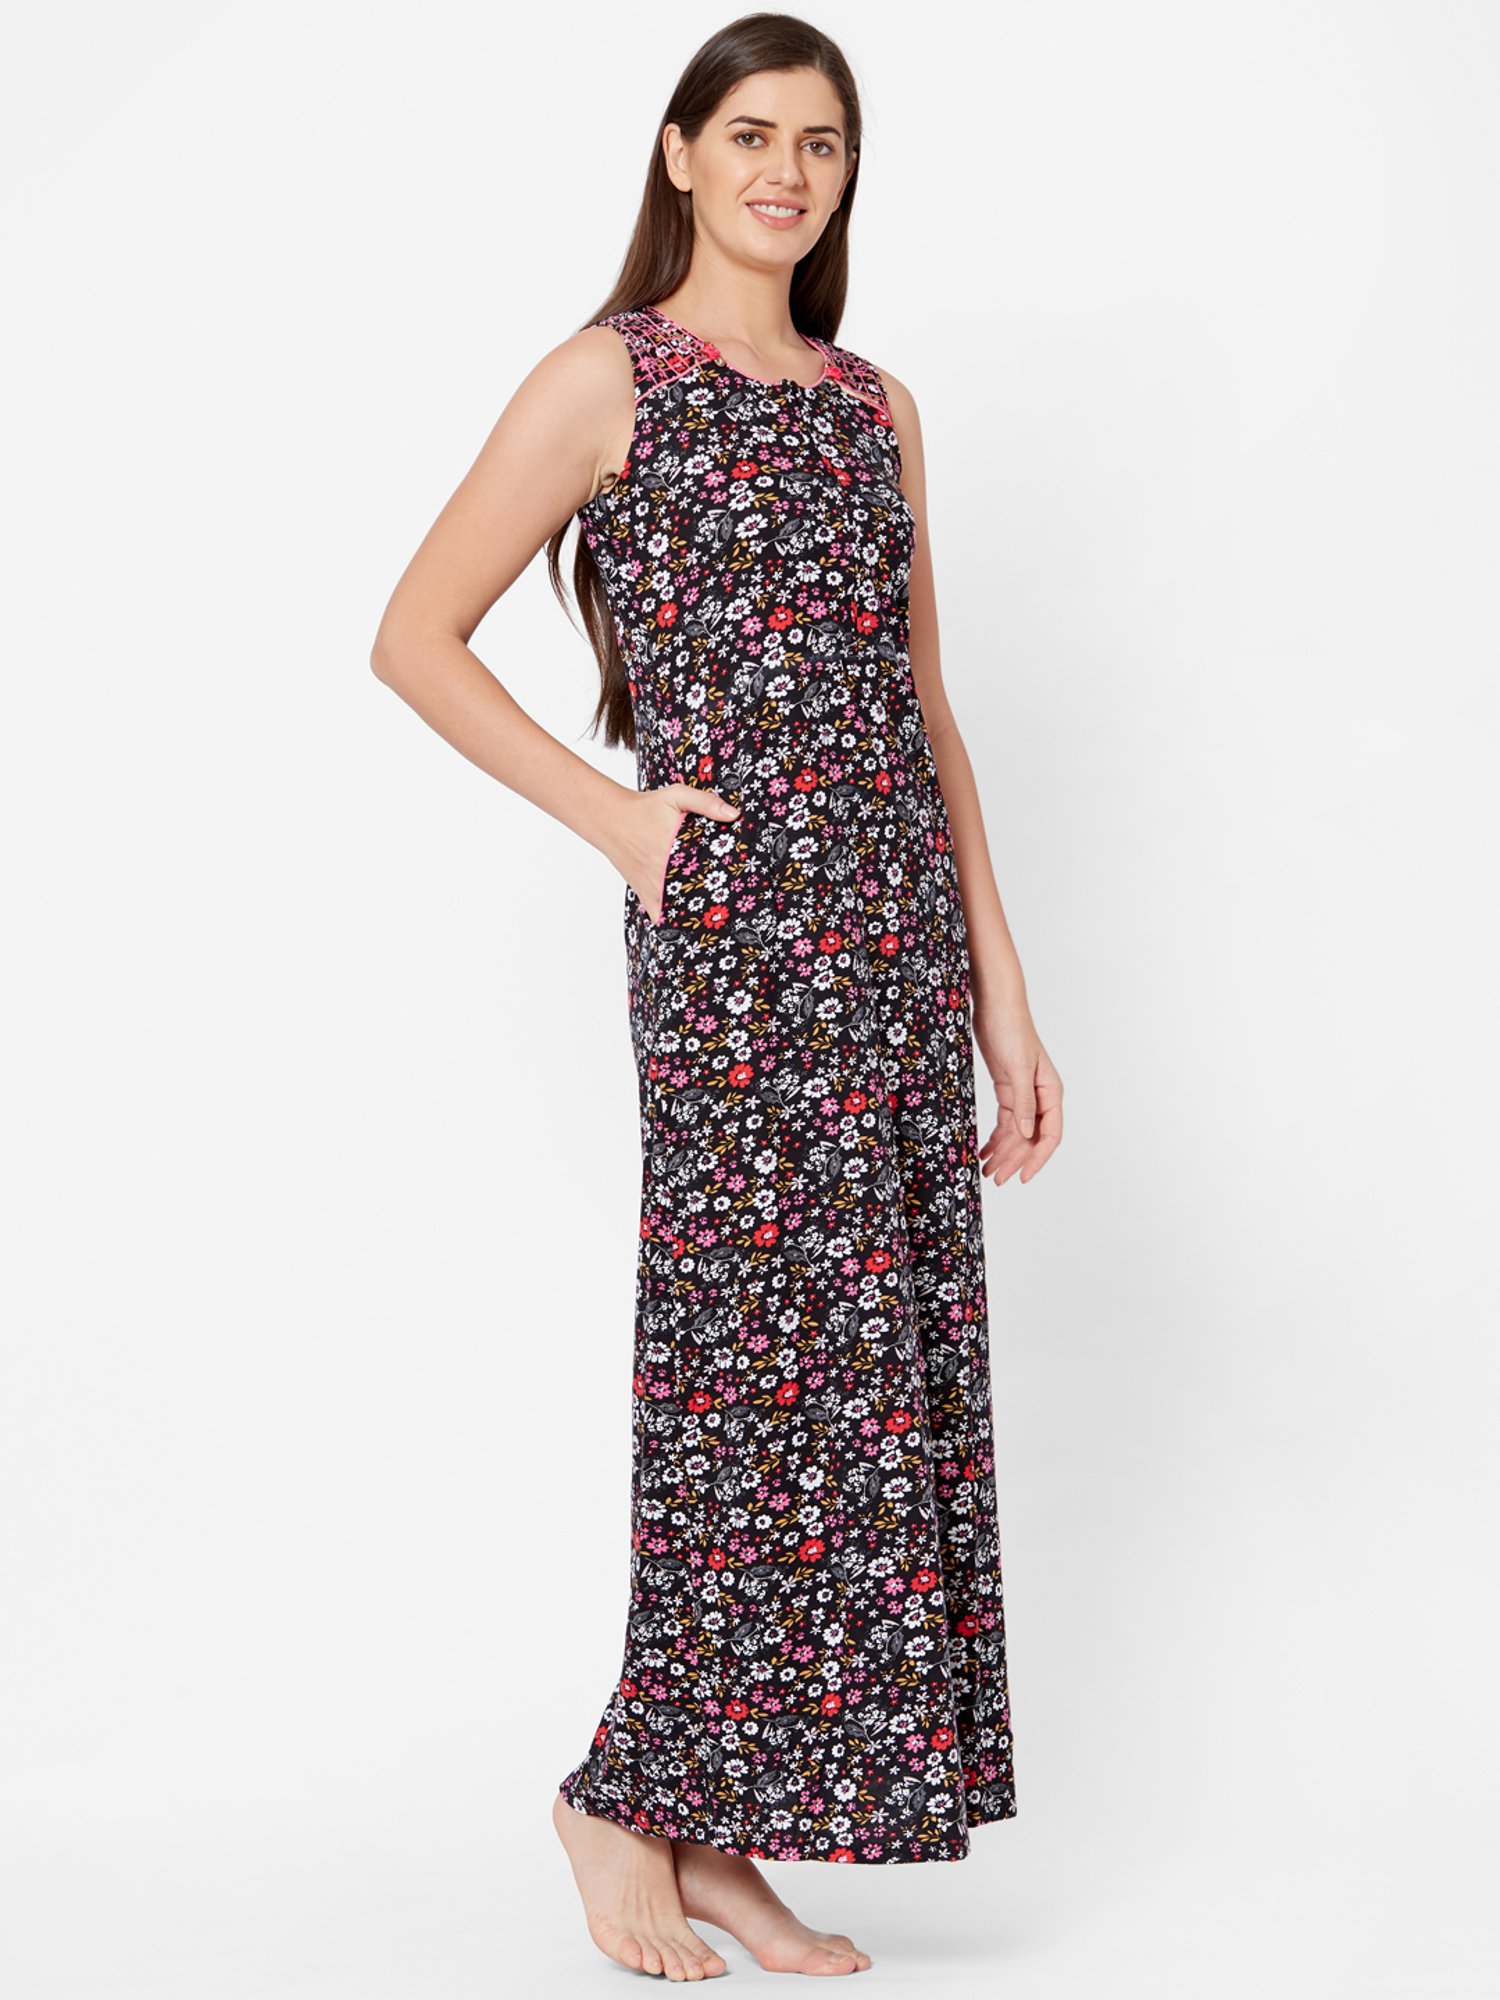 Buy Juliet Black Floral Print Nighty from top Brands at Best Prices Online  in India